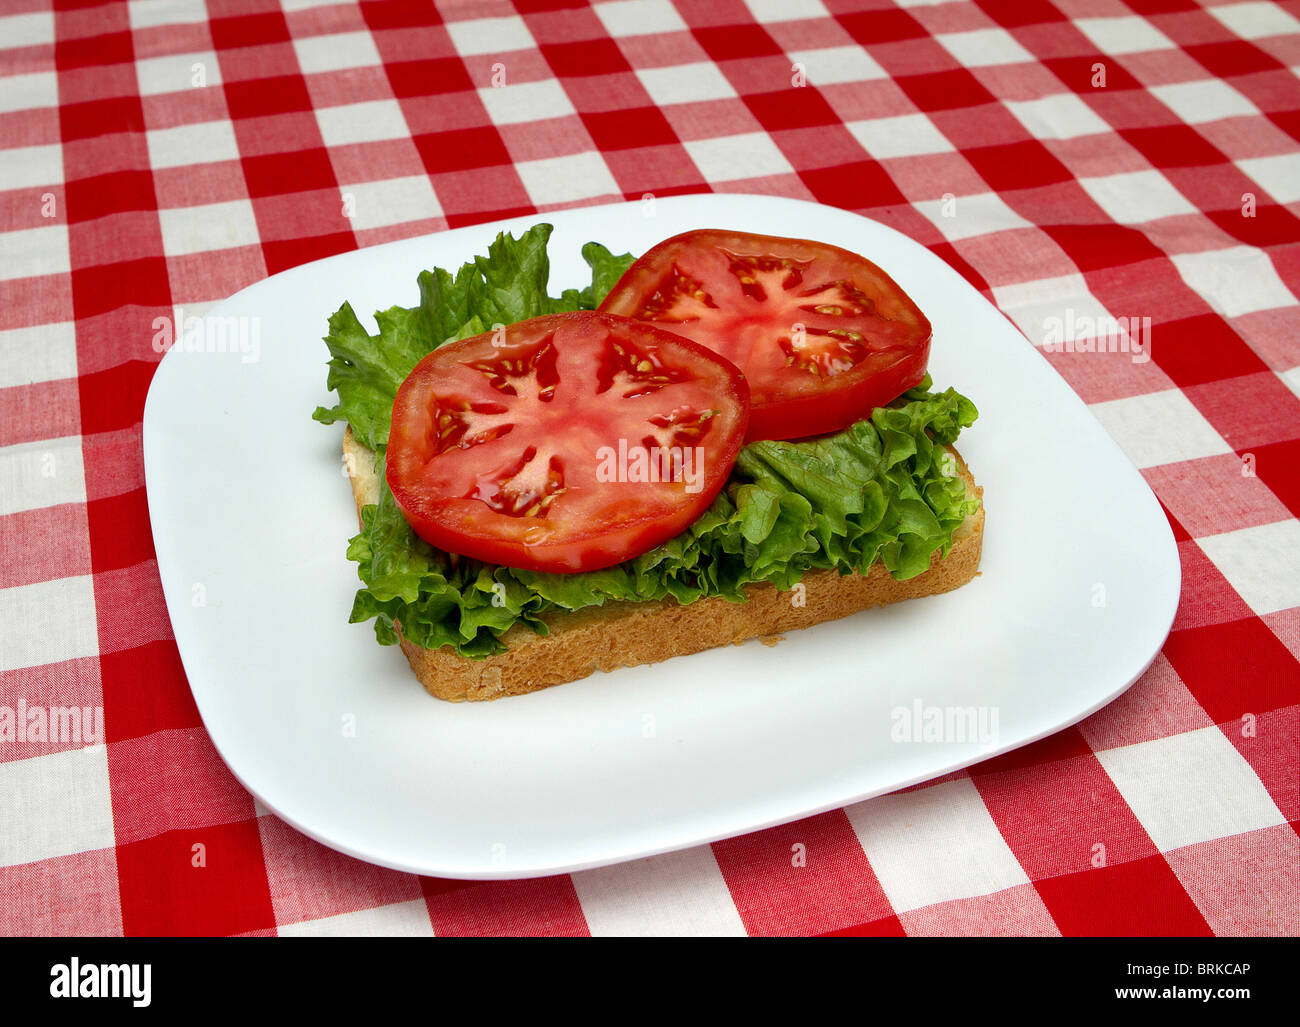 incomplete blt sandwich on a white plate with red checked background Stock Photo